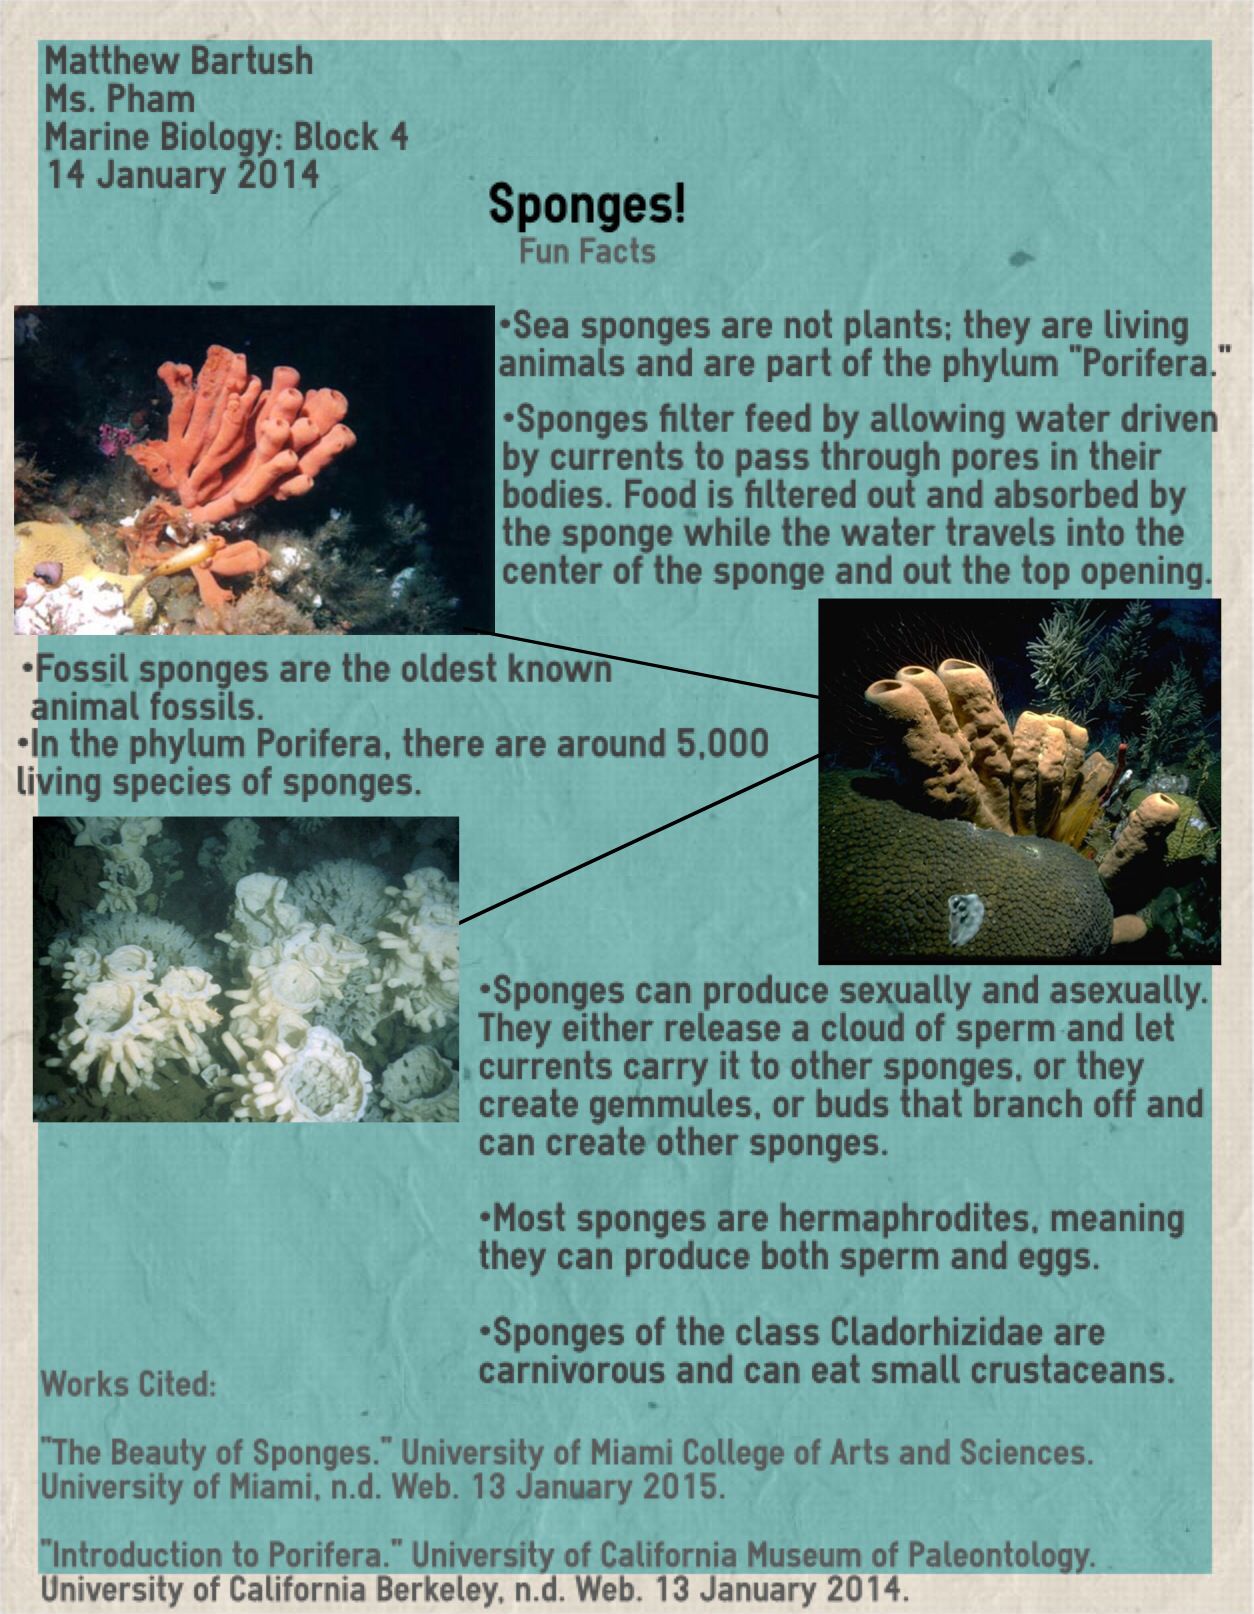 What are some interesting facts about sponges?